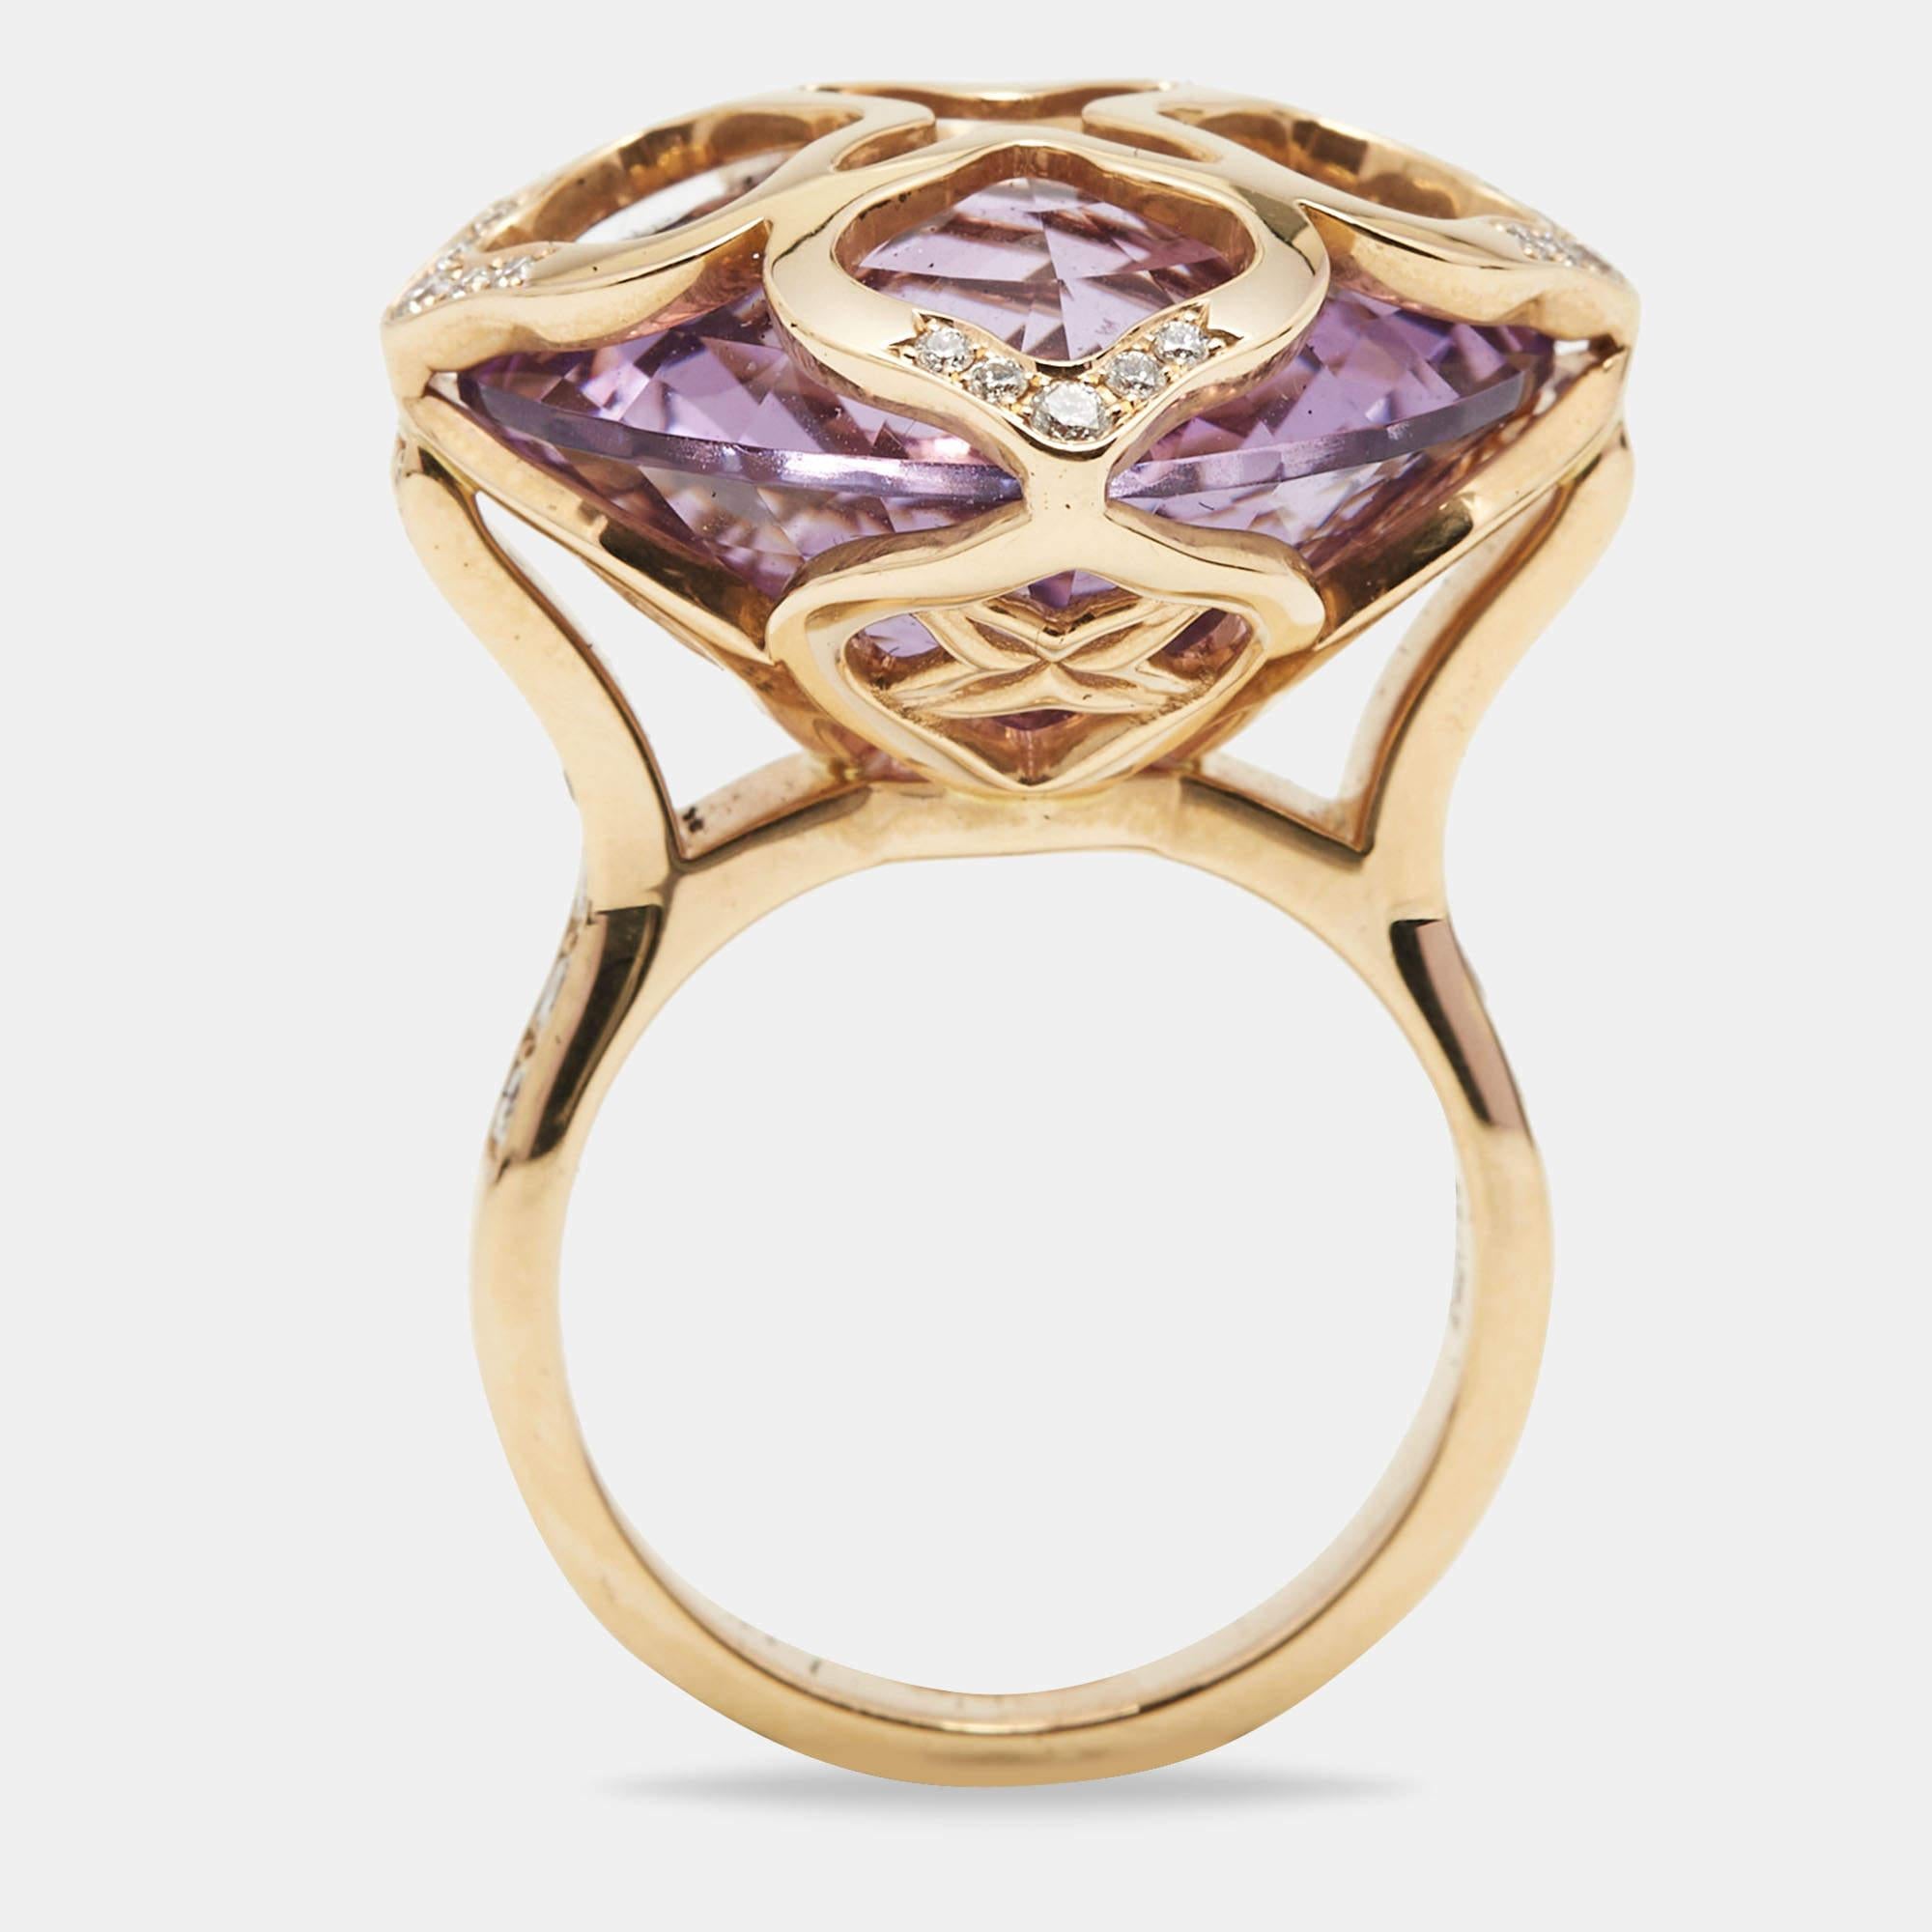 Aesthetic Movement Chopard Imperiale Amethyst Diamond 18k Rose Gold Cocktail Ring Size 53